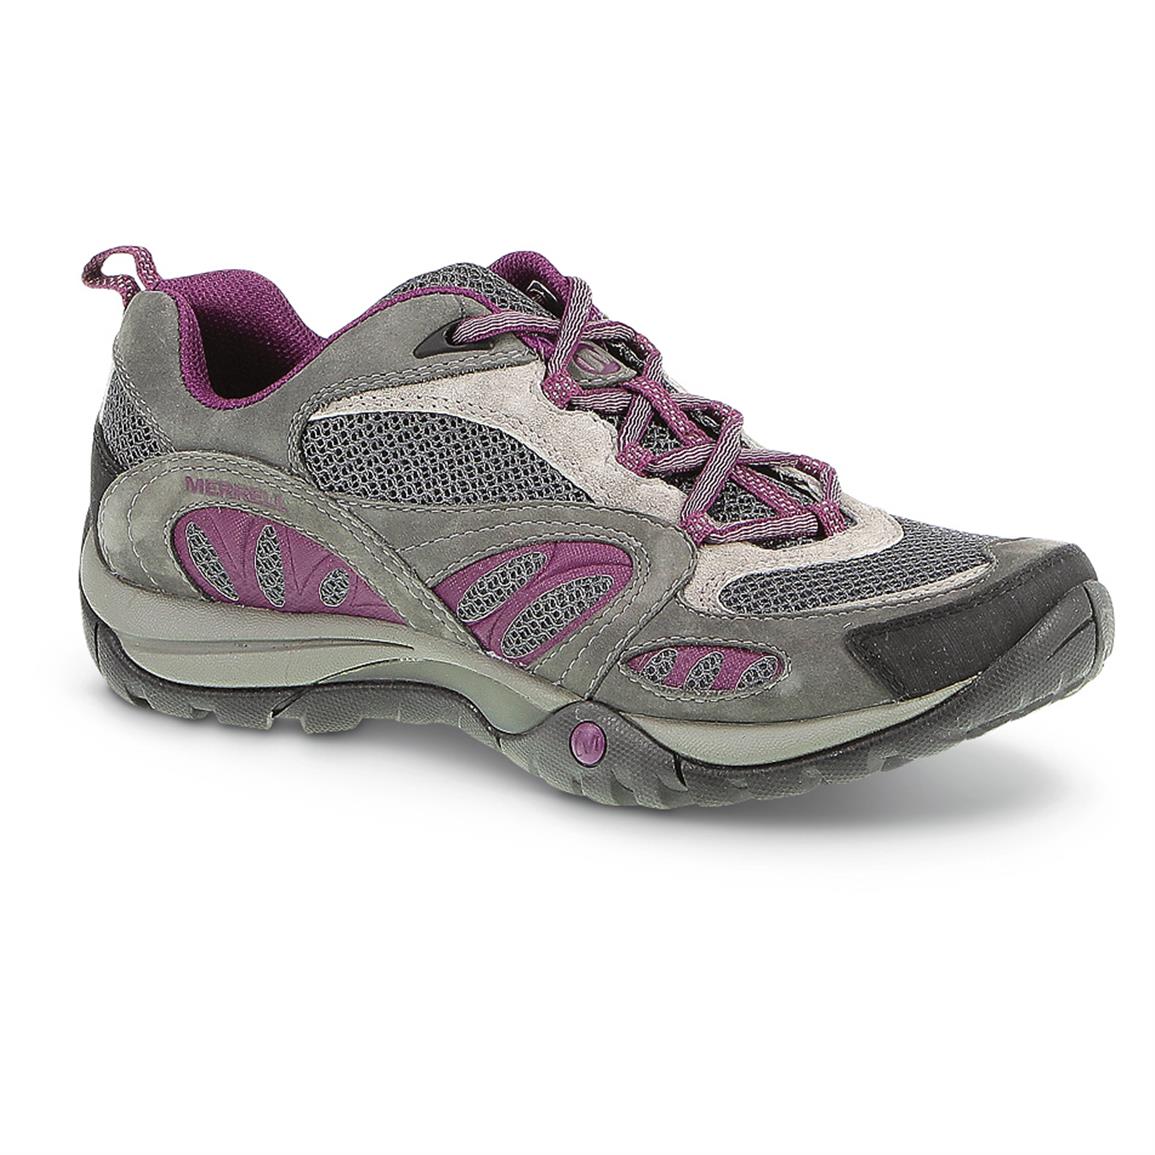 Merrell Women's Azura Trail Shoes - 425154, Hiking Boots & Shoes at ...